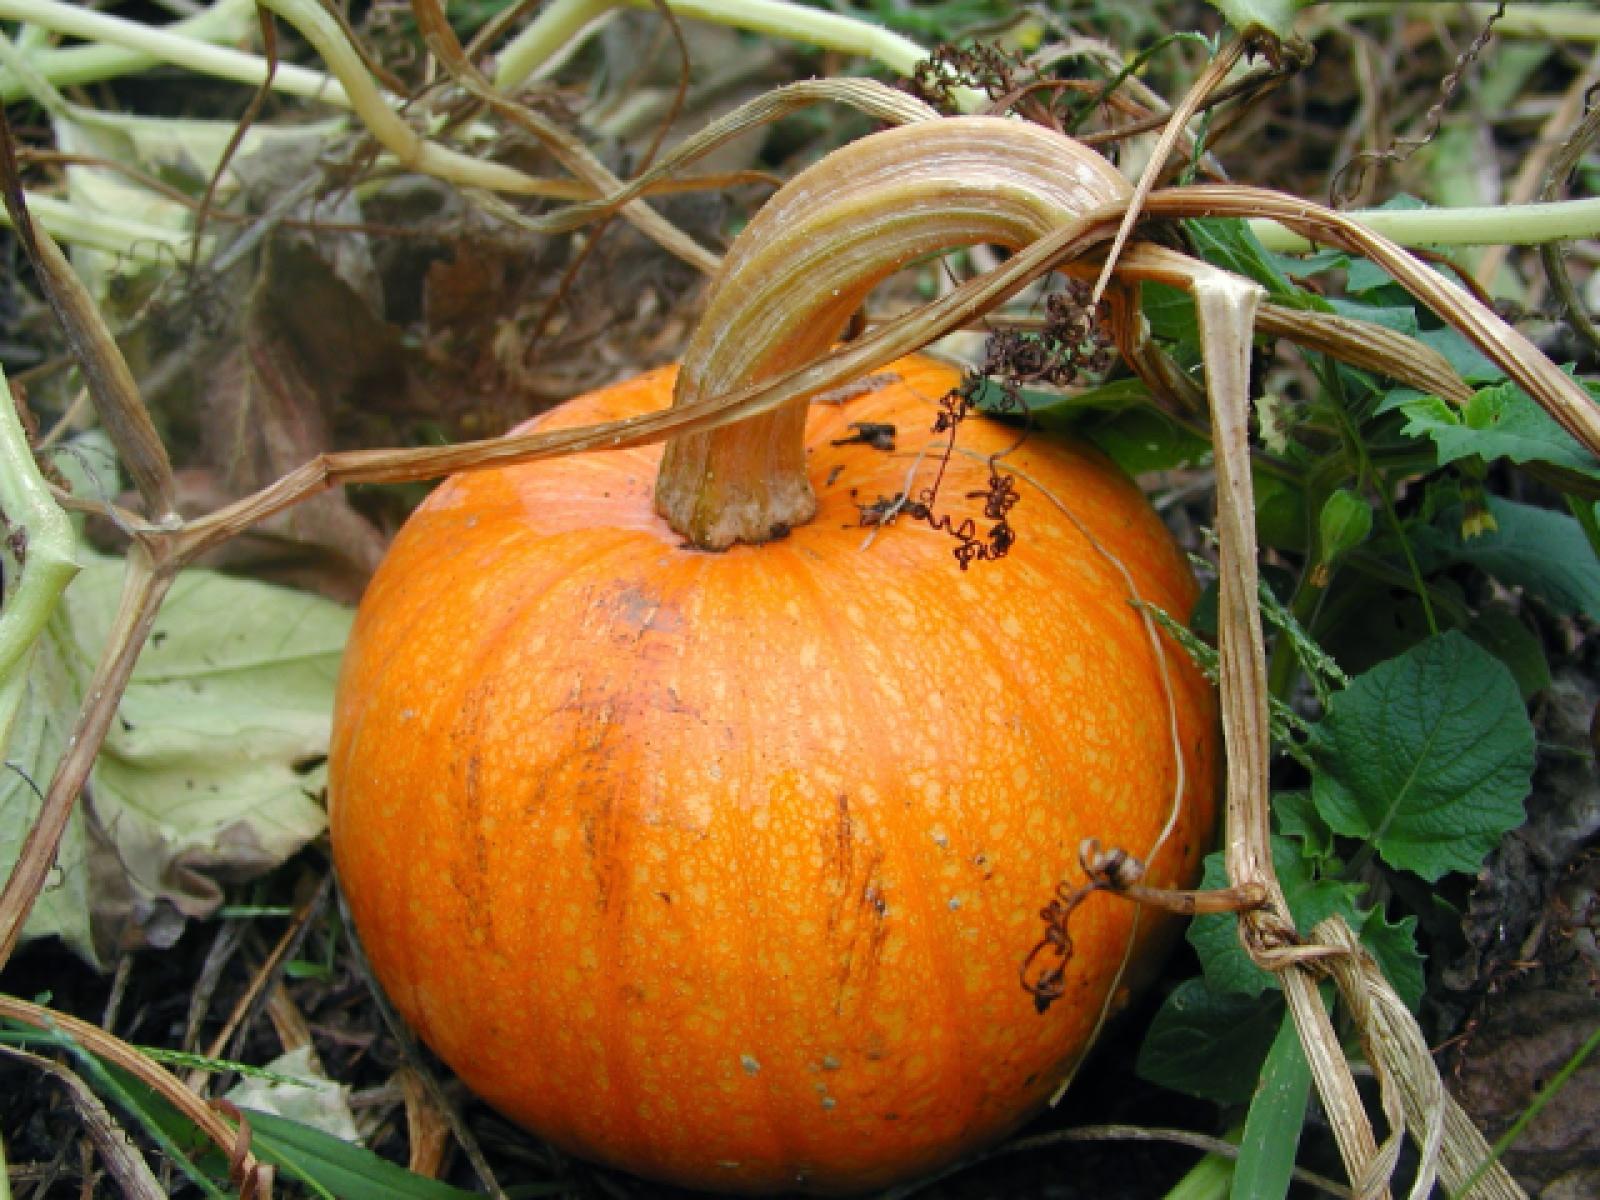 Pumpkin ripening on withered stalks